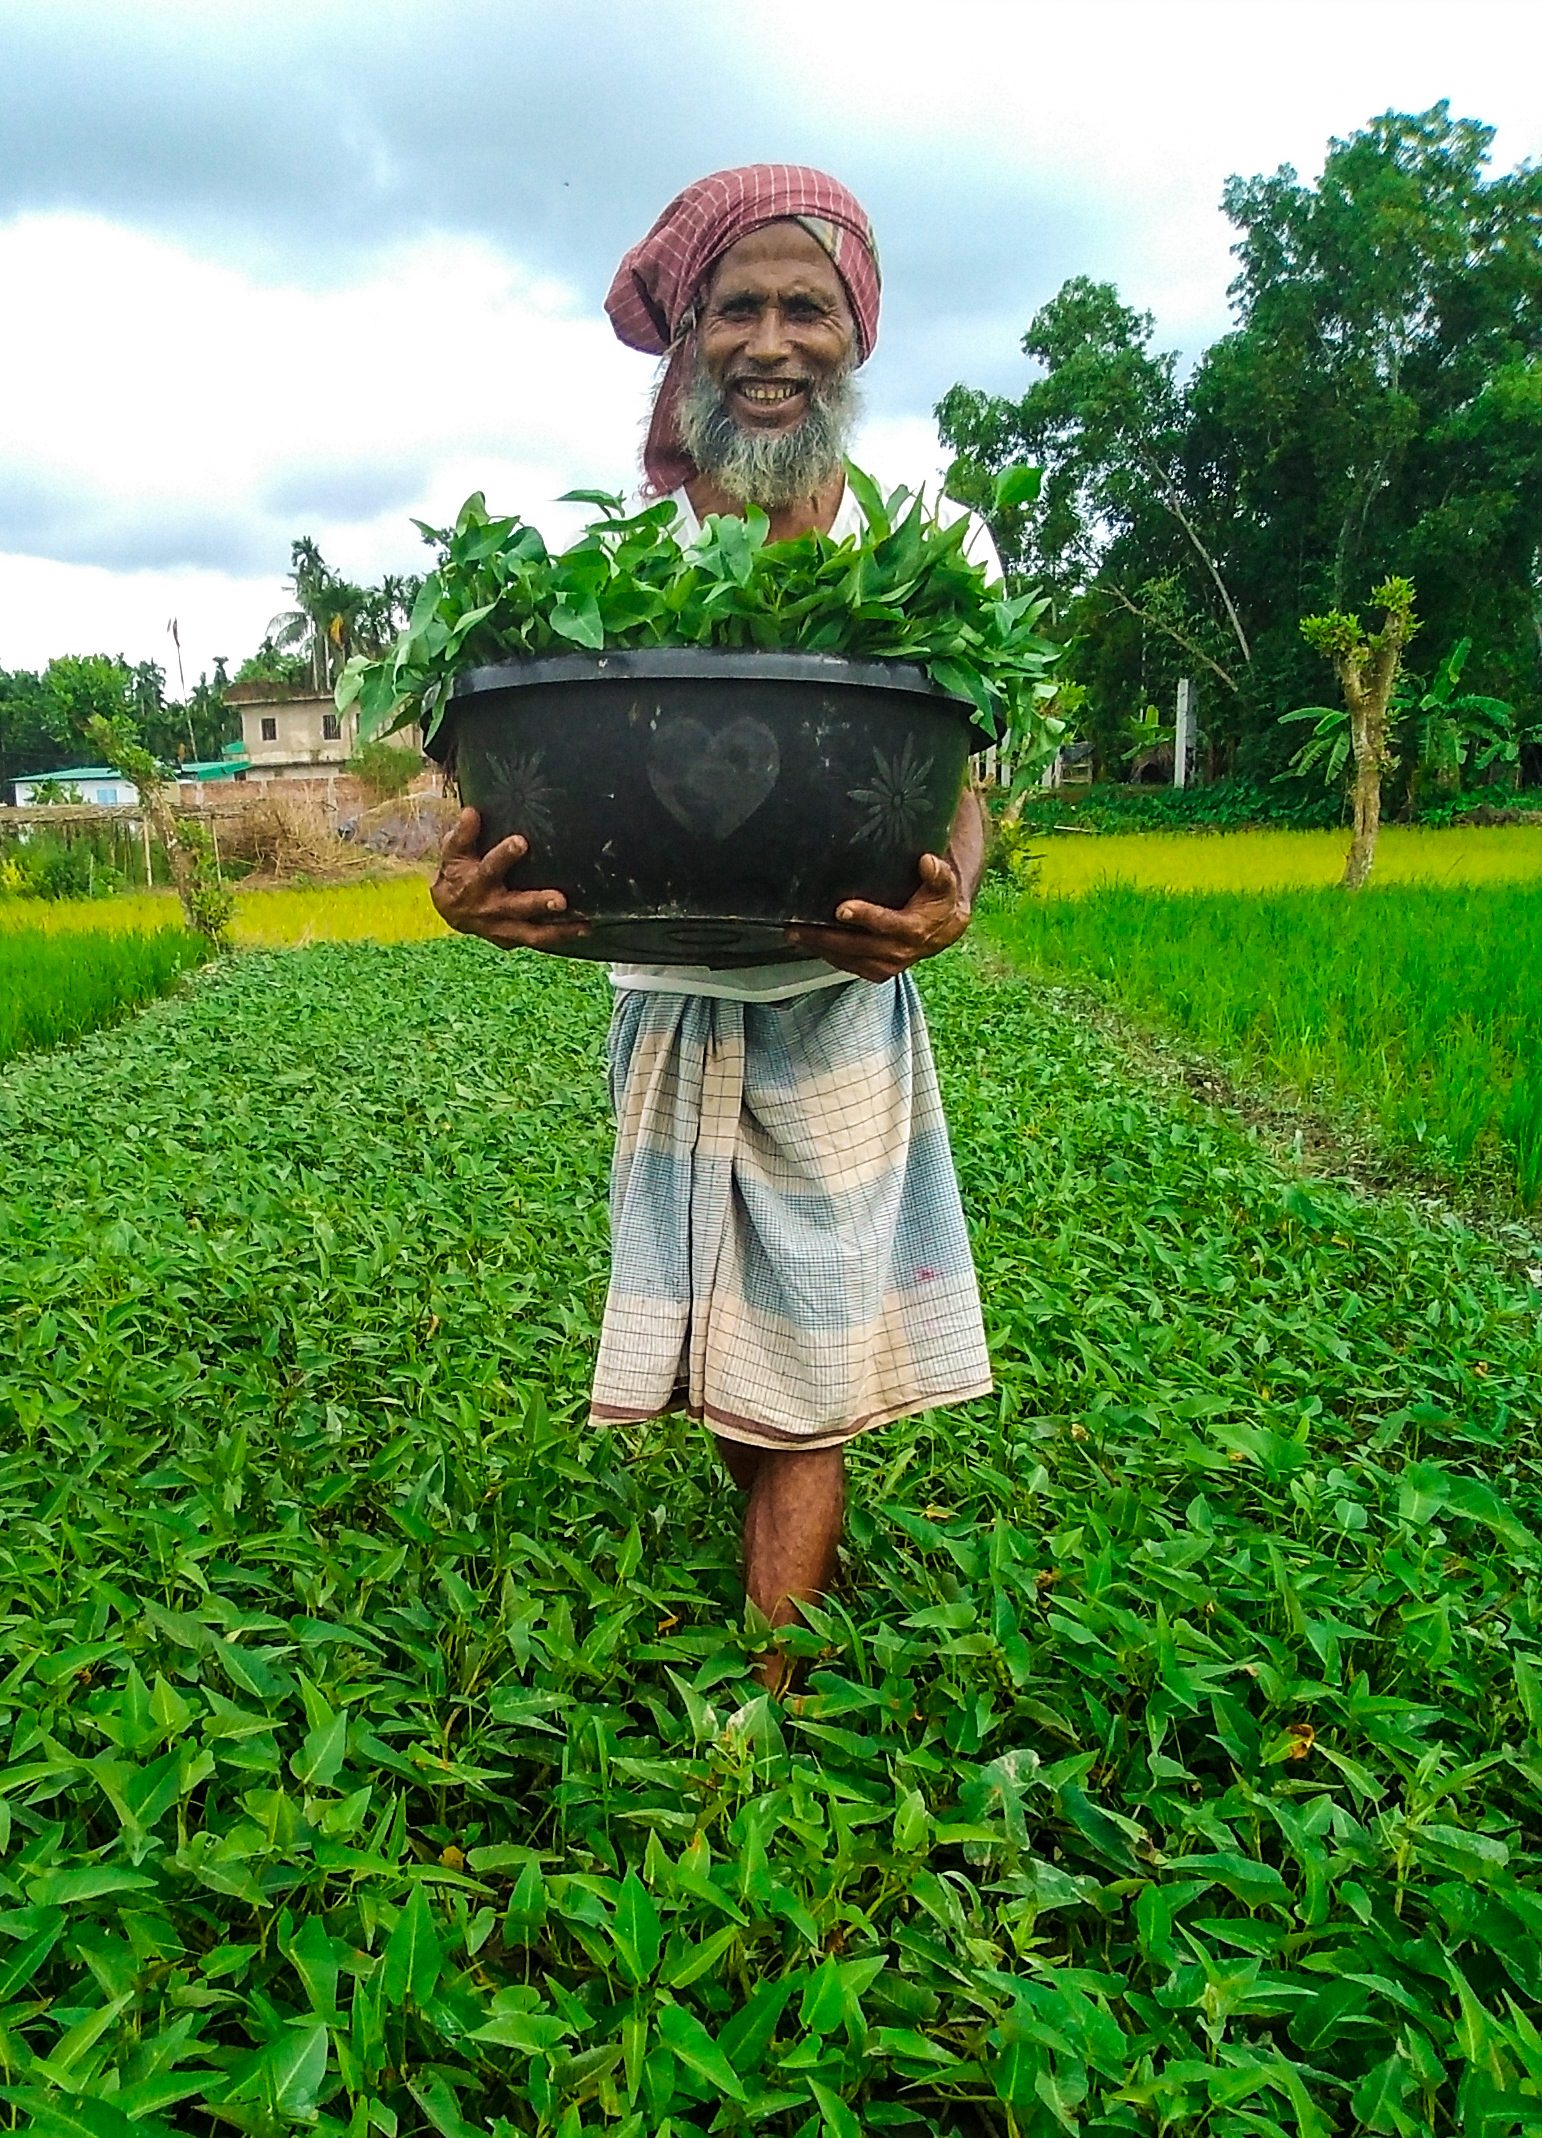 Amanul standing in his crops holding a basket of vegetables